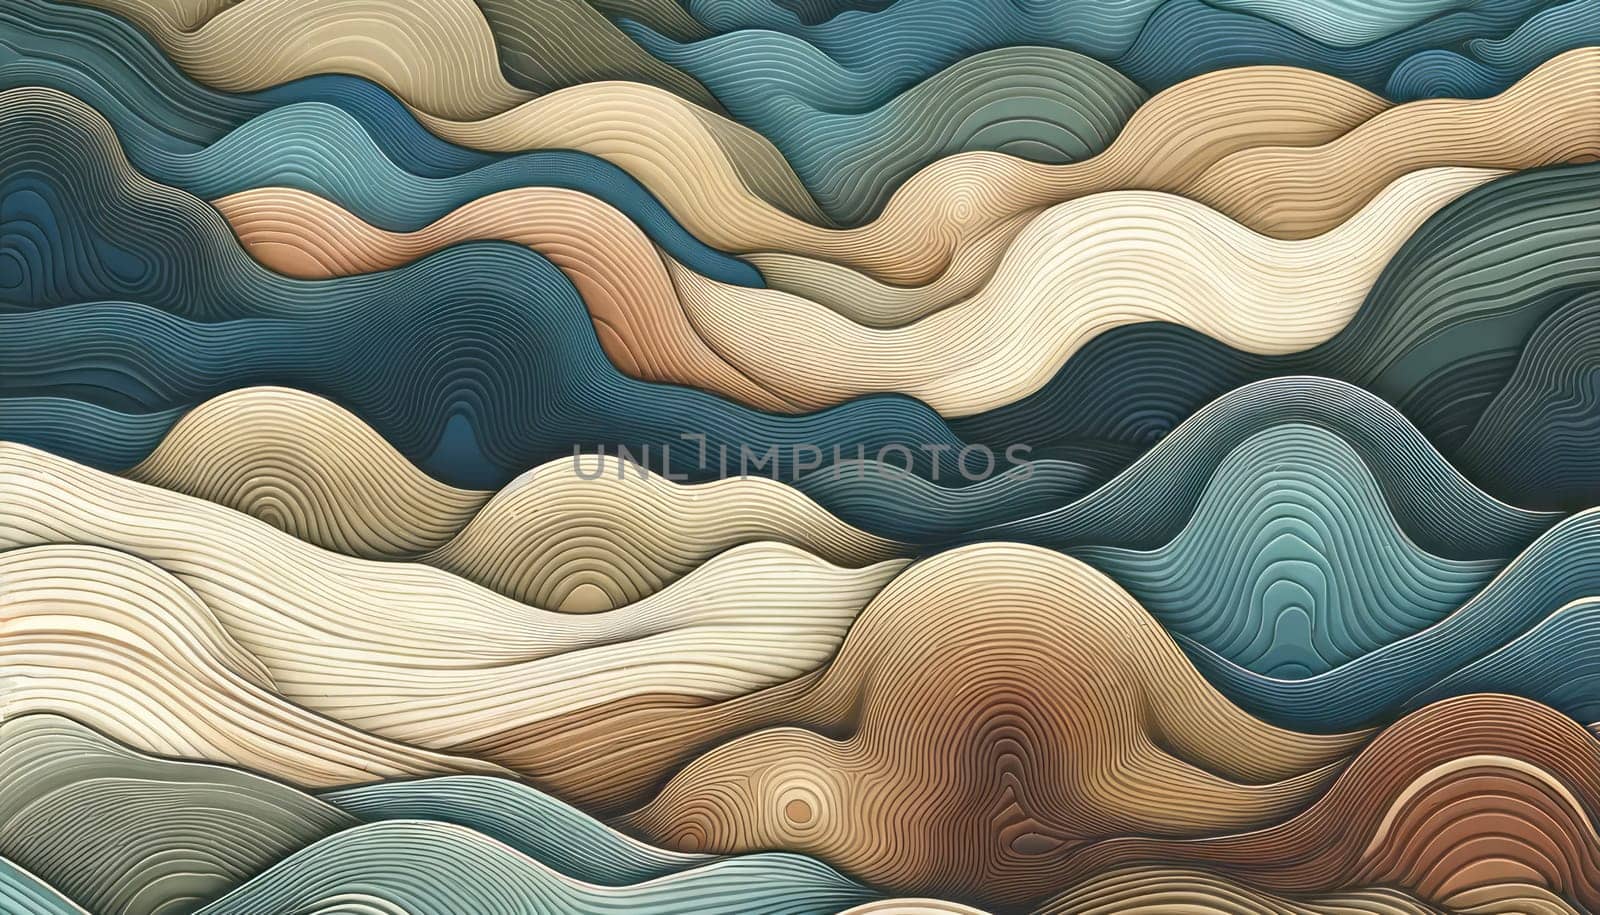 A wide digital illustration of abstract, wavy layers resembling a topographical map. The image features a blend of earthy tones, ranging from sandy beige to deep ocean blue, creating a landscape of rolling hills and valleys. The design has a natural and organic feel, with the varying shades providing a sense of depth and dimension. The waves are smooth with a subtle texture that suggests layers of sediment or the natural gradation found in geological formations. The overall effect is calming and reminiscent of undulating terrain.